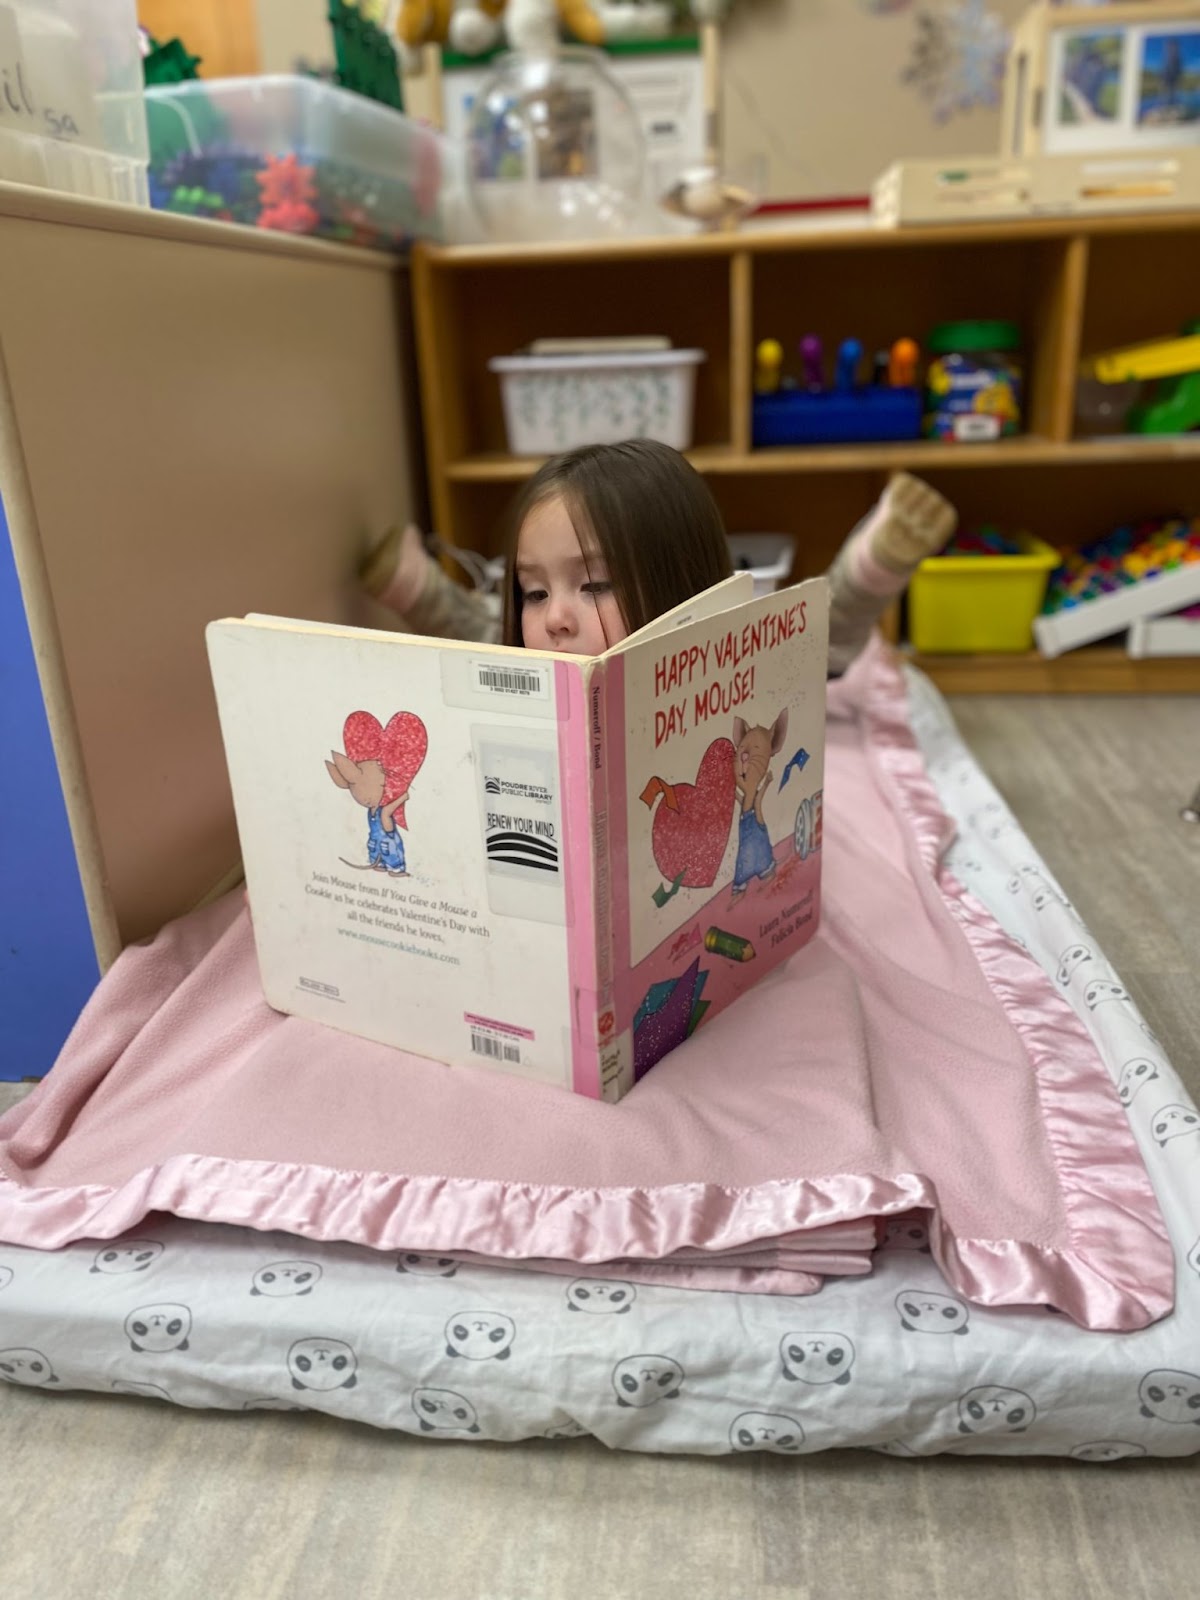 A little girl lays on a pink blanket while reading the book “Happy Valentine’s Day Mouse!”